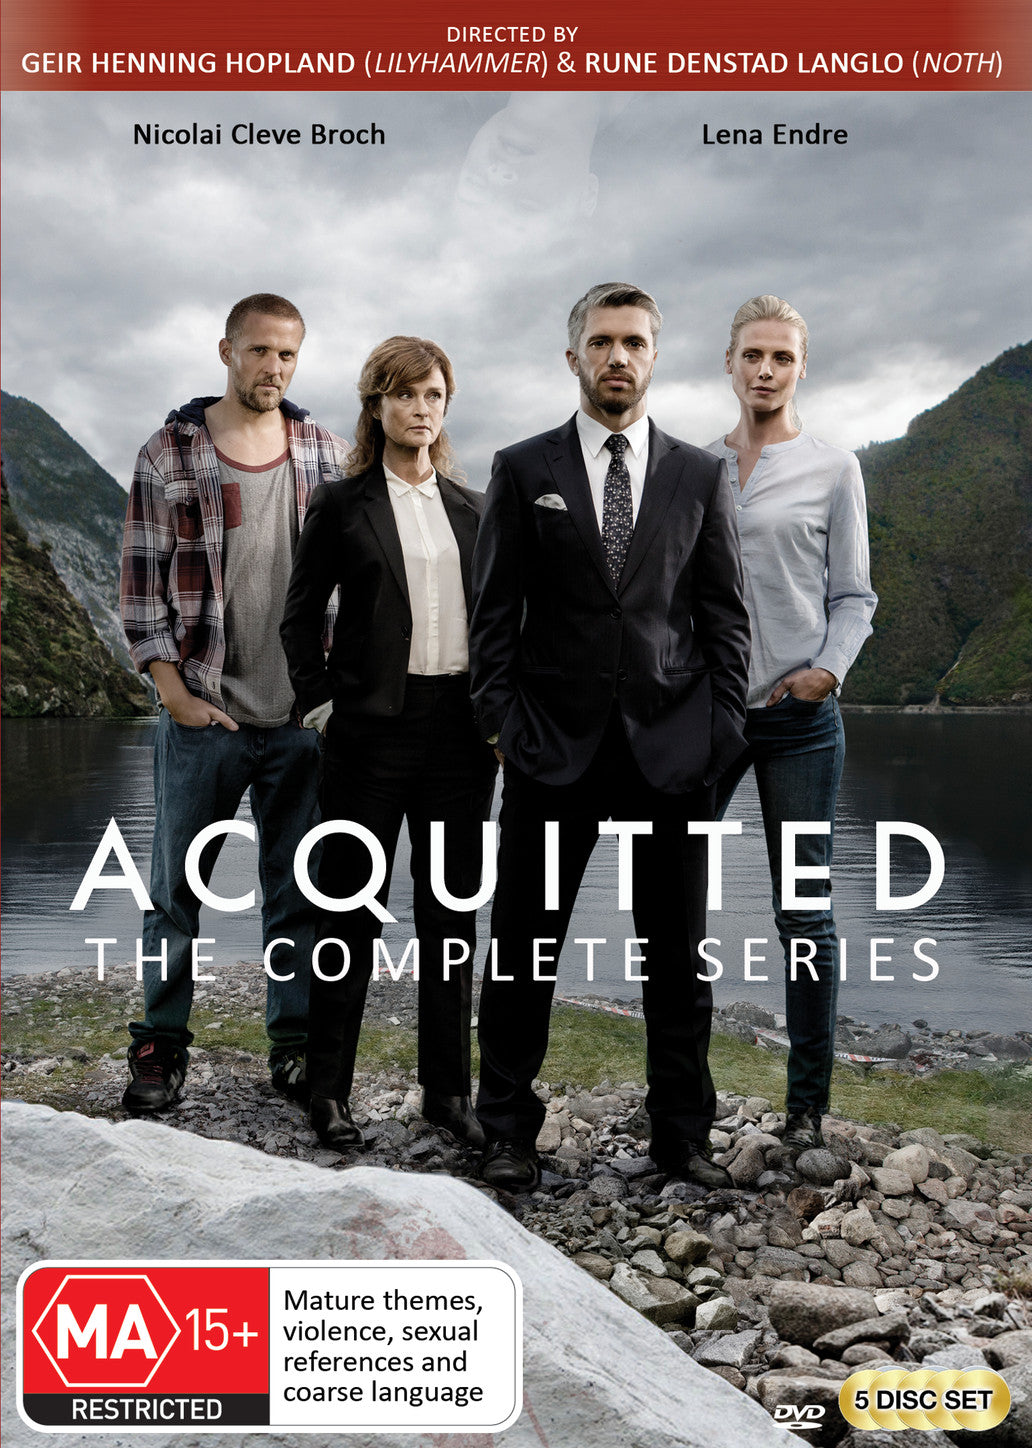 ACQUITTED: THE COMPLETE SERIES